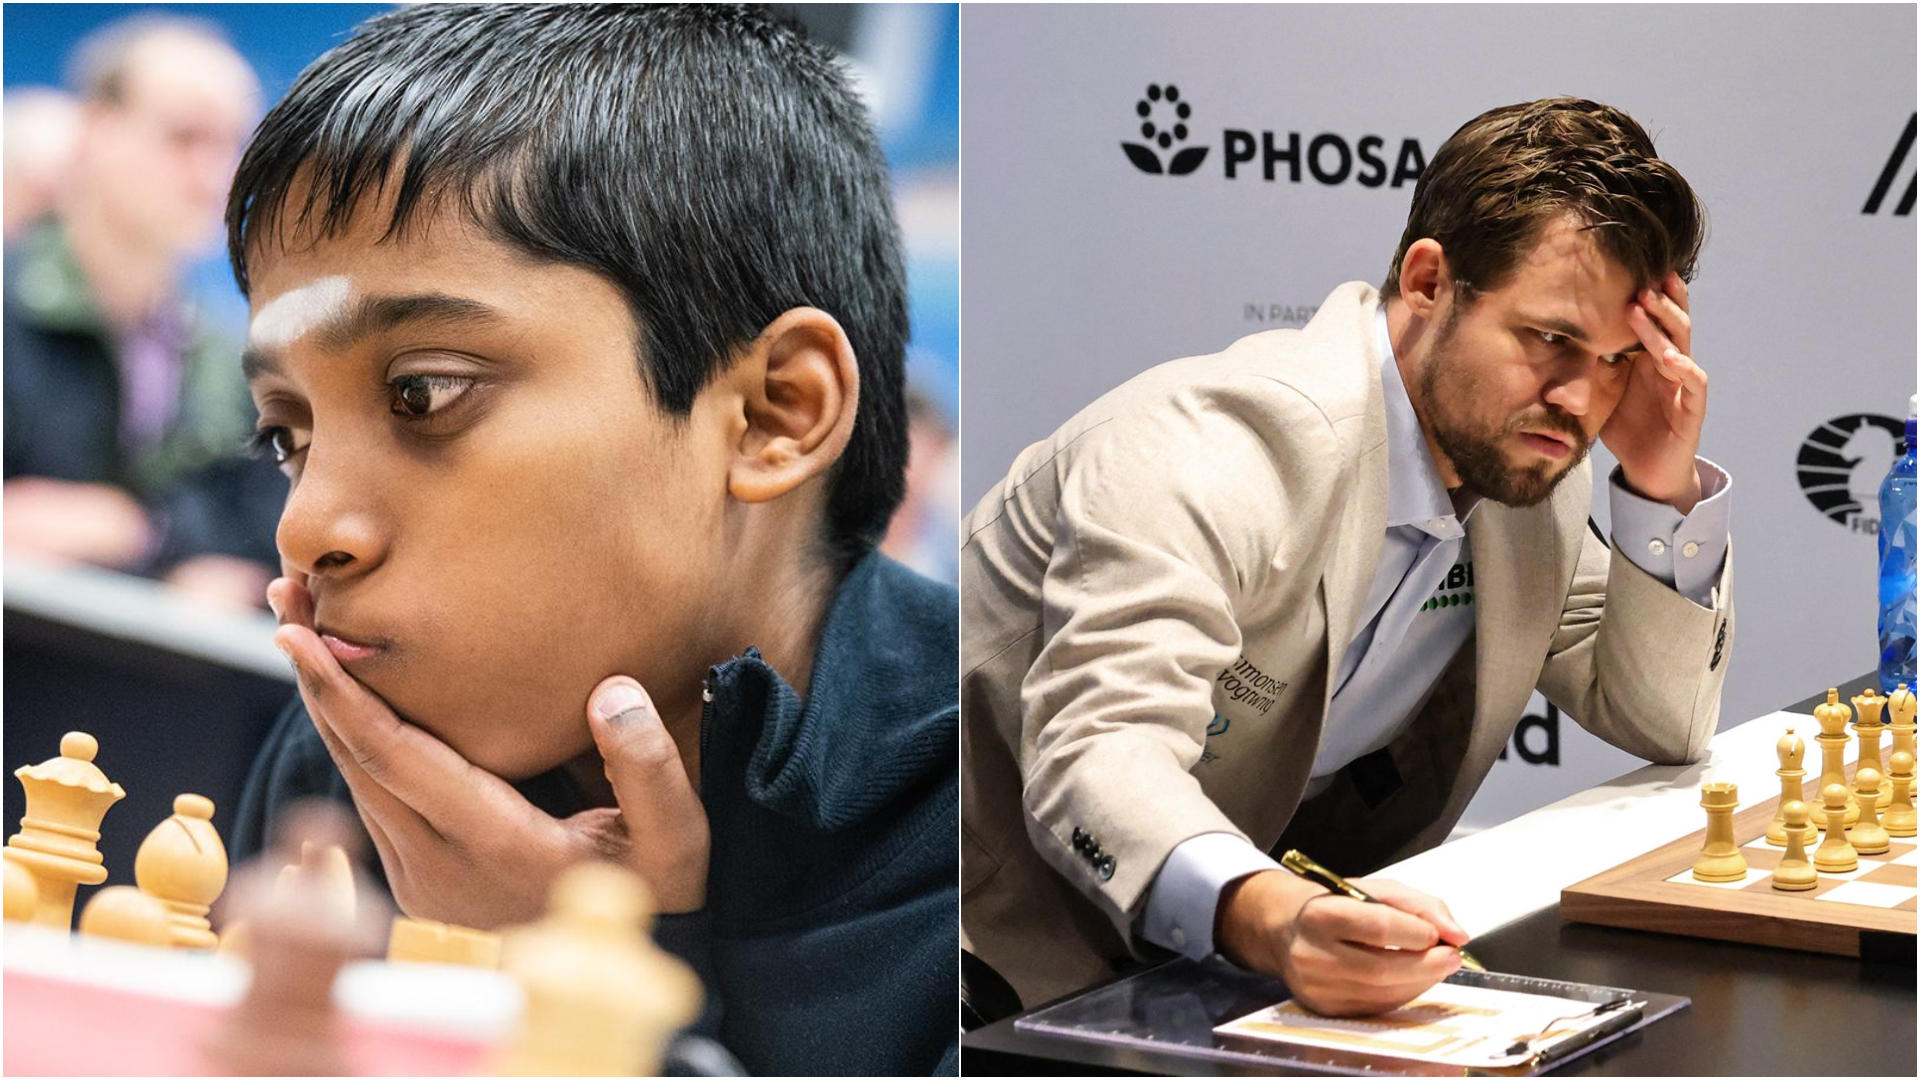 Who are the best Indian chess players of this generation? - Quora